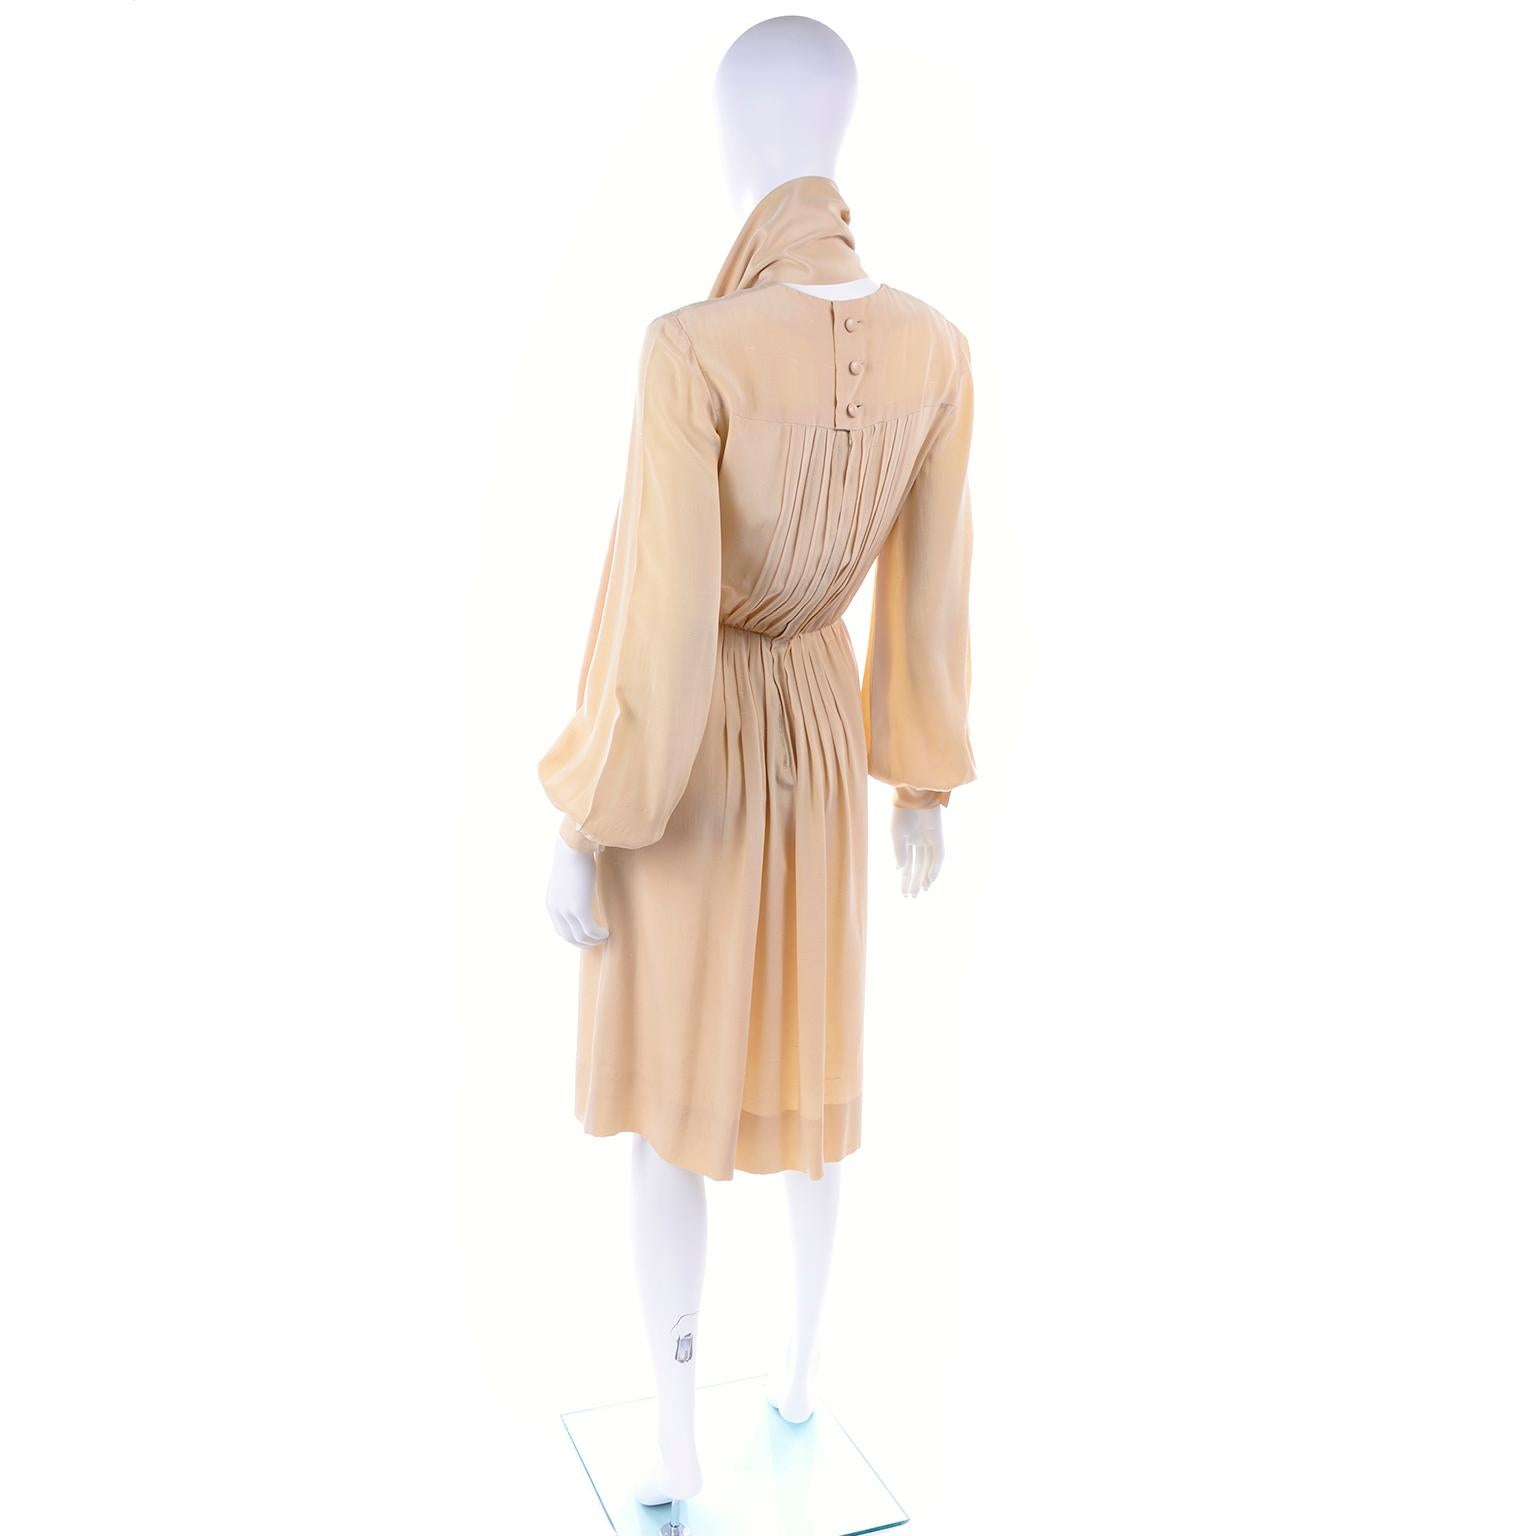 Women's Vintage Christian Dior Couture Numbered 1975 Runway Dress With Scarf